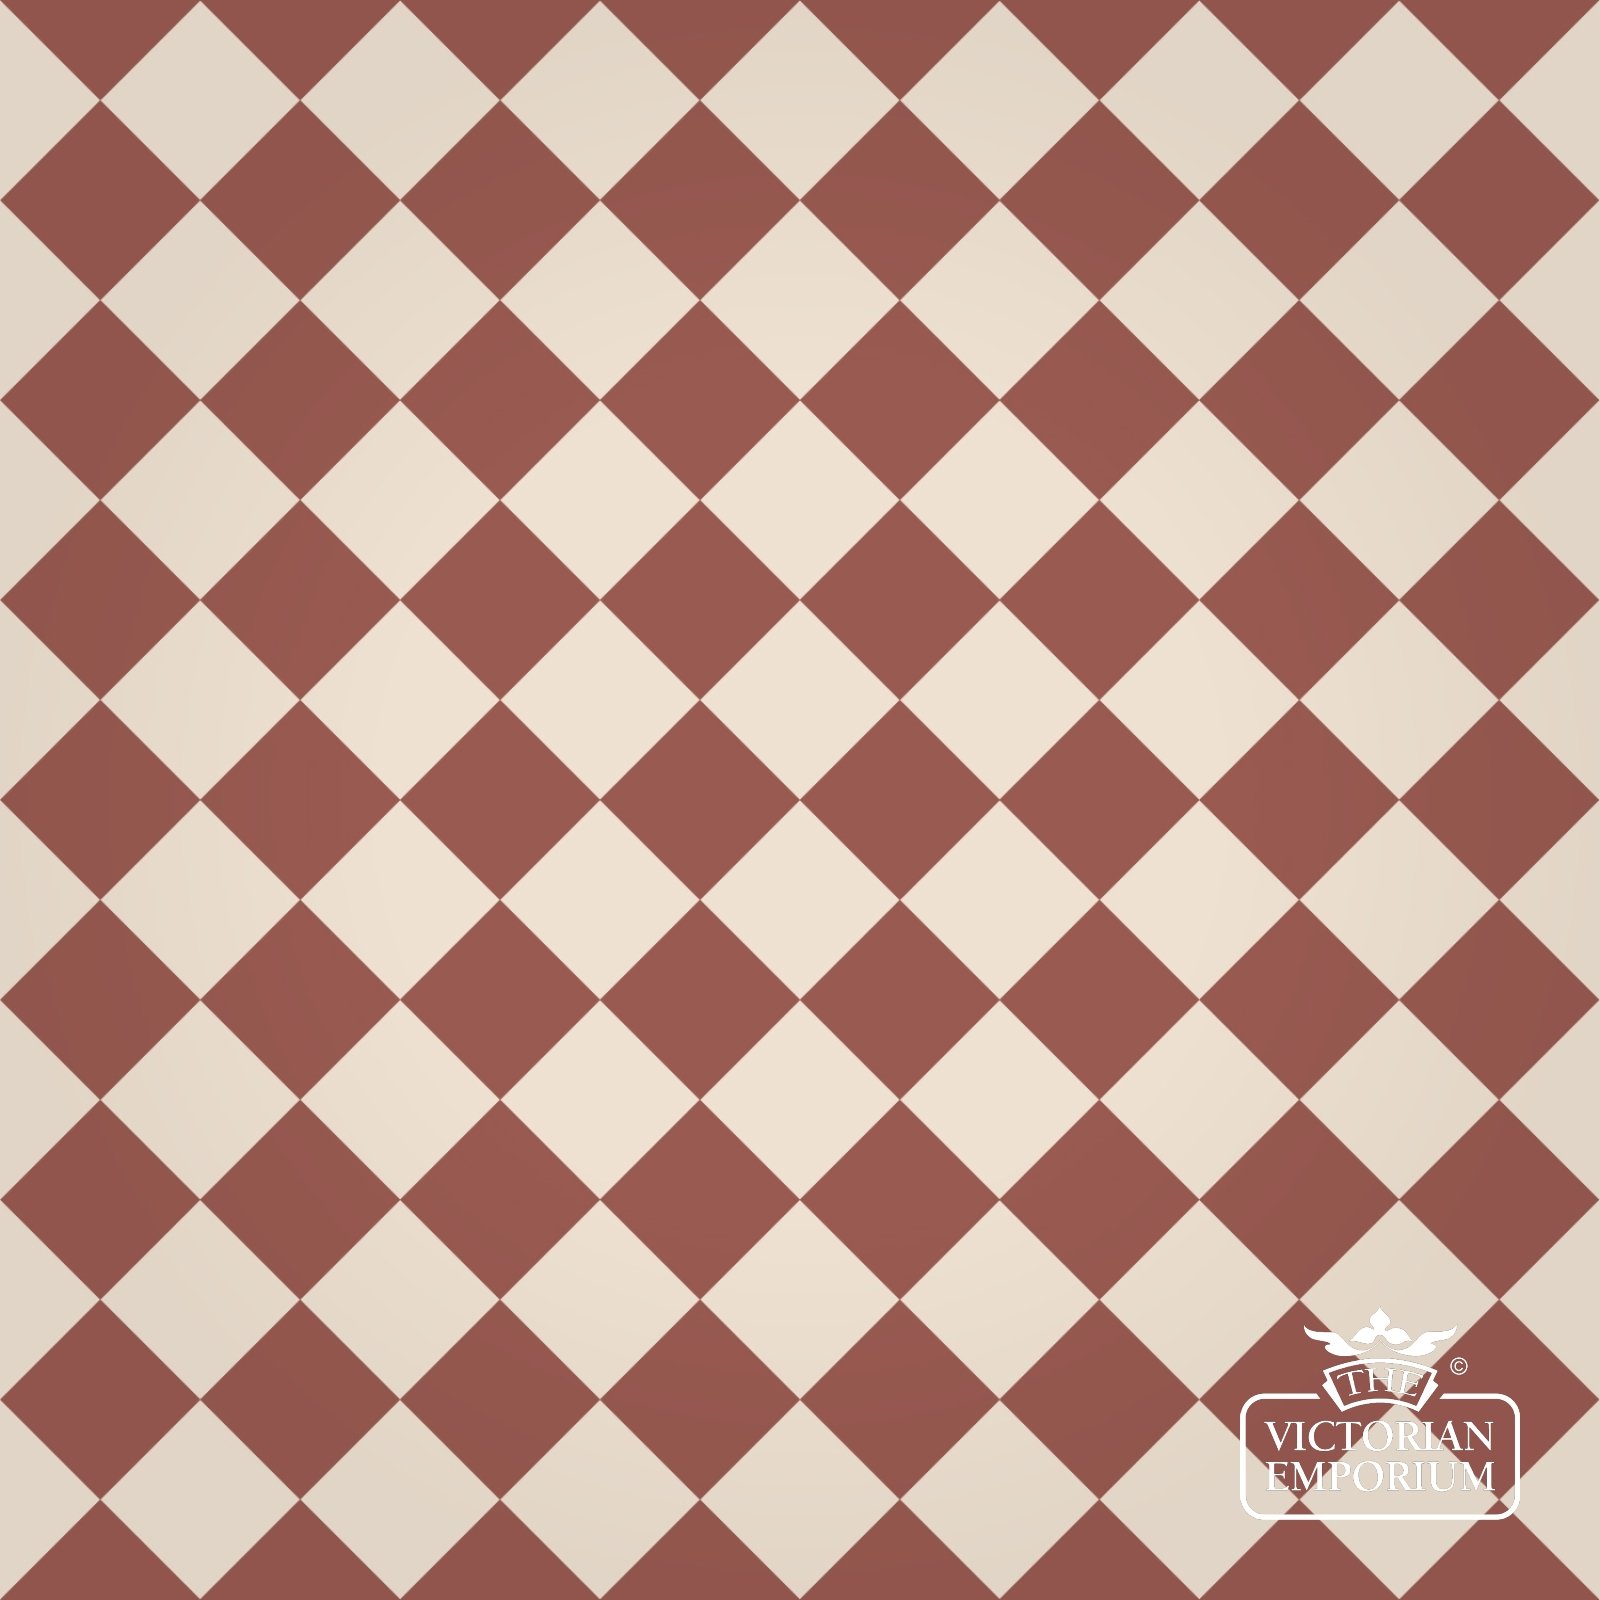 Victorian Path tiles - Red and White 64mm x 64mm squares (suitable for outdoor use)